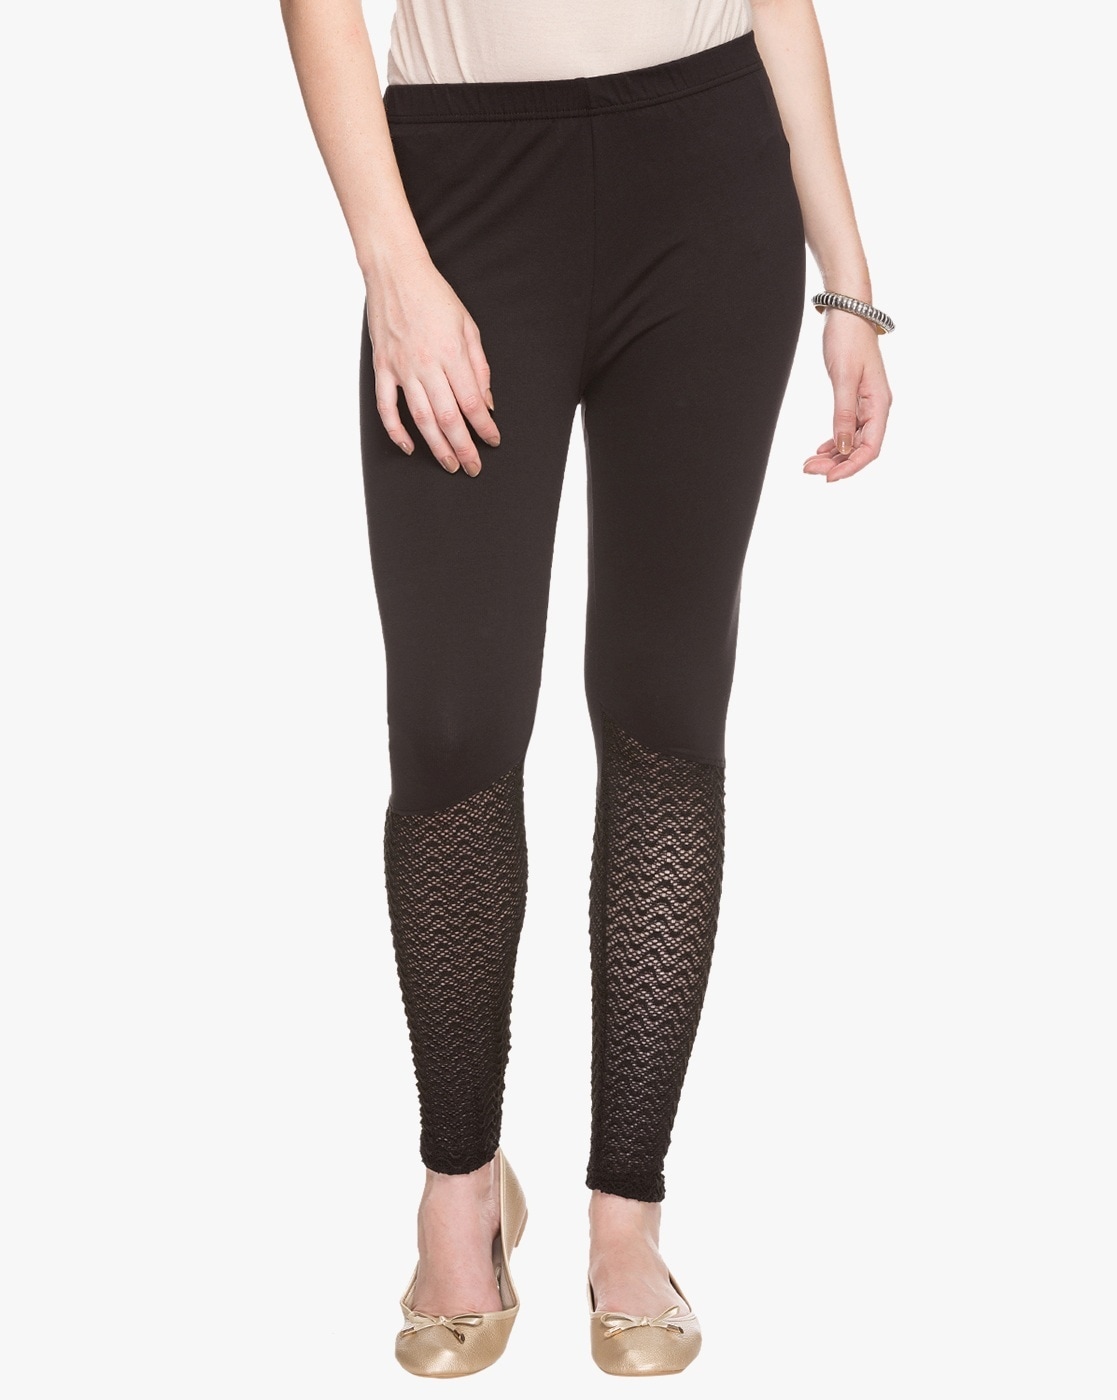 Lace Leggings with Elasticated Waistband